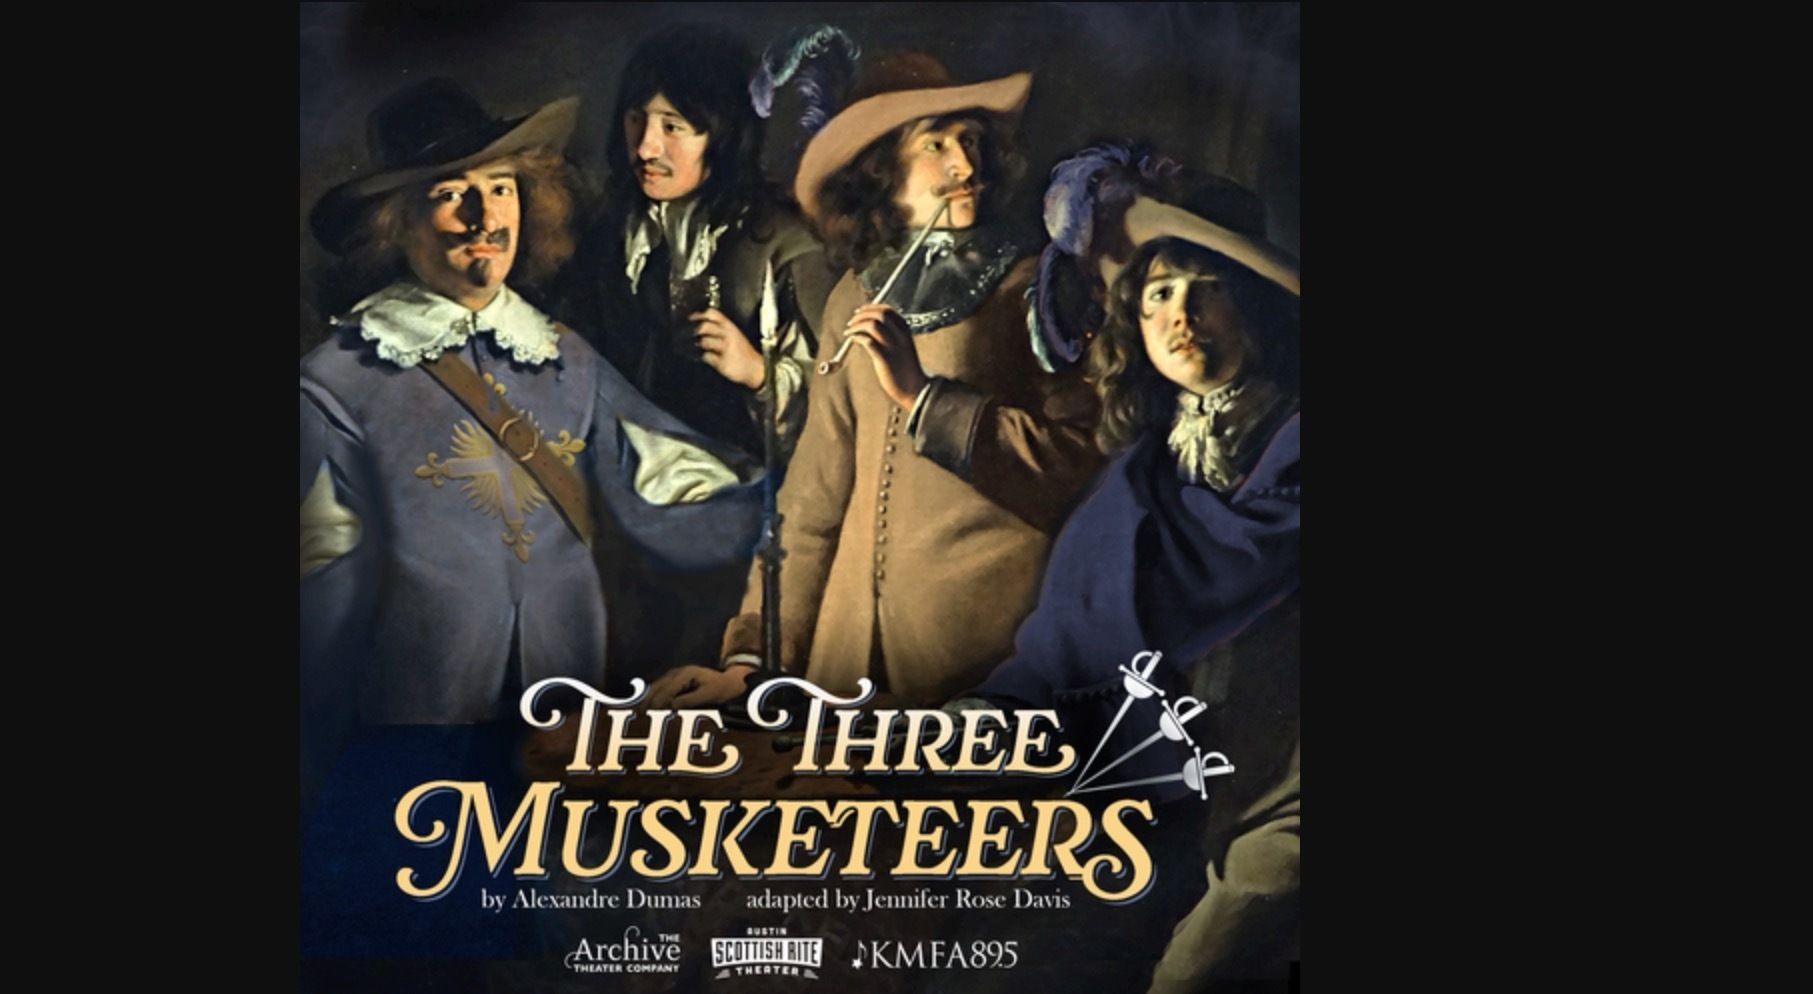 The Three Musketeers, Austin, Texas, United States